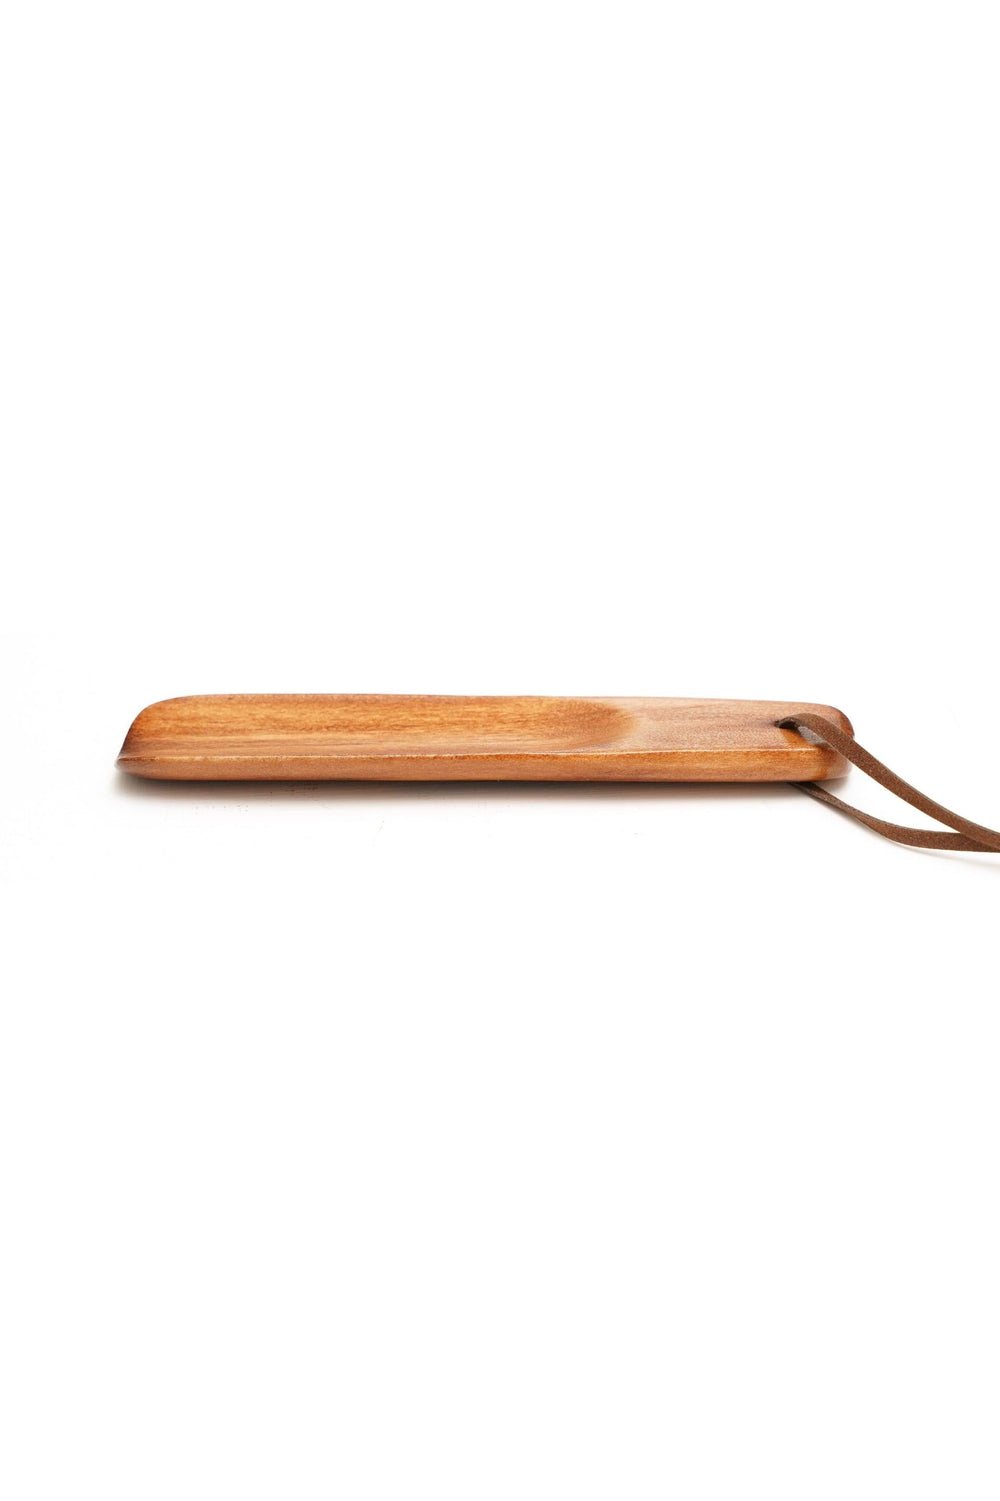 BROWN SHOEHORN